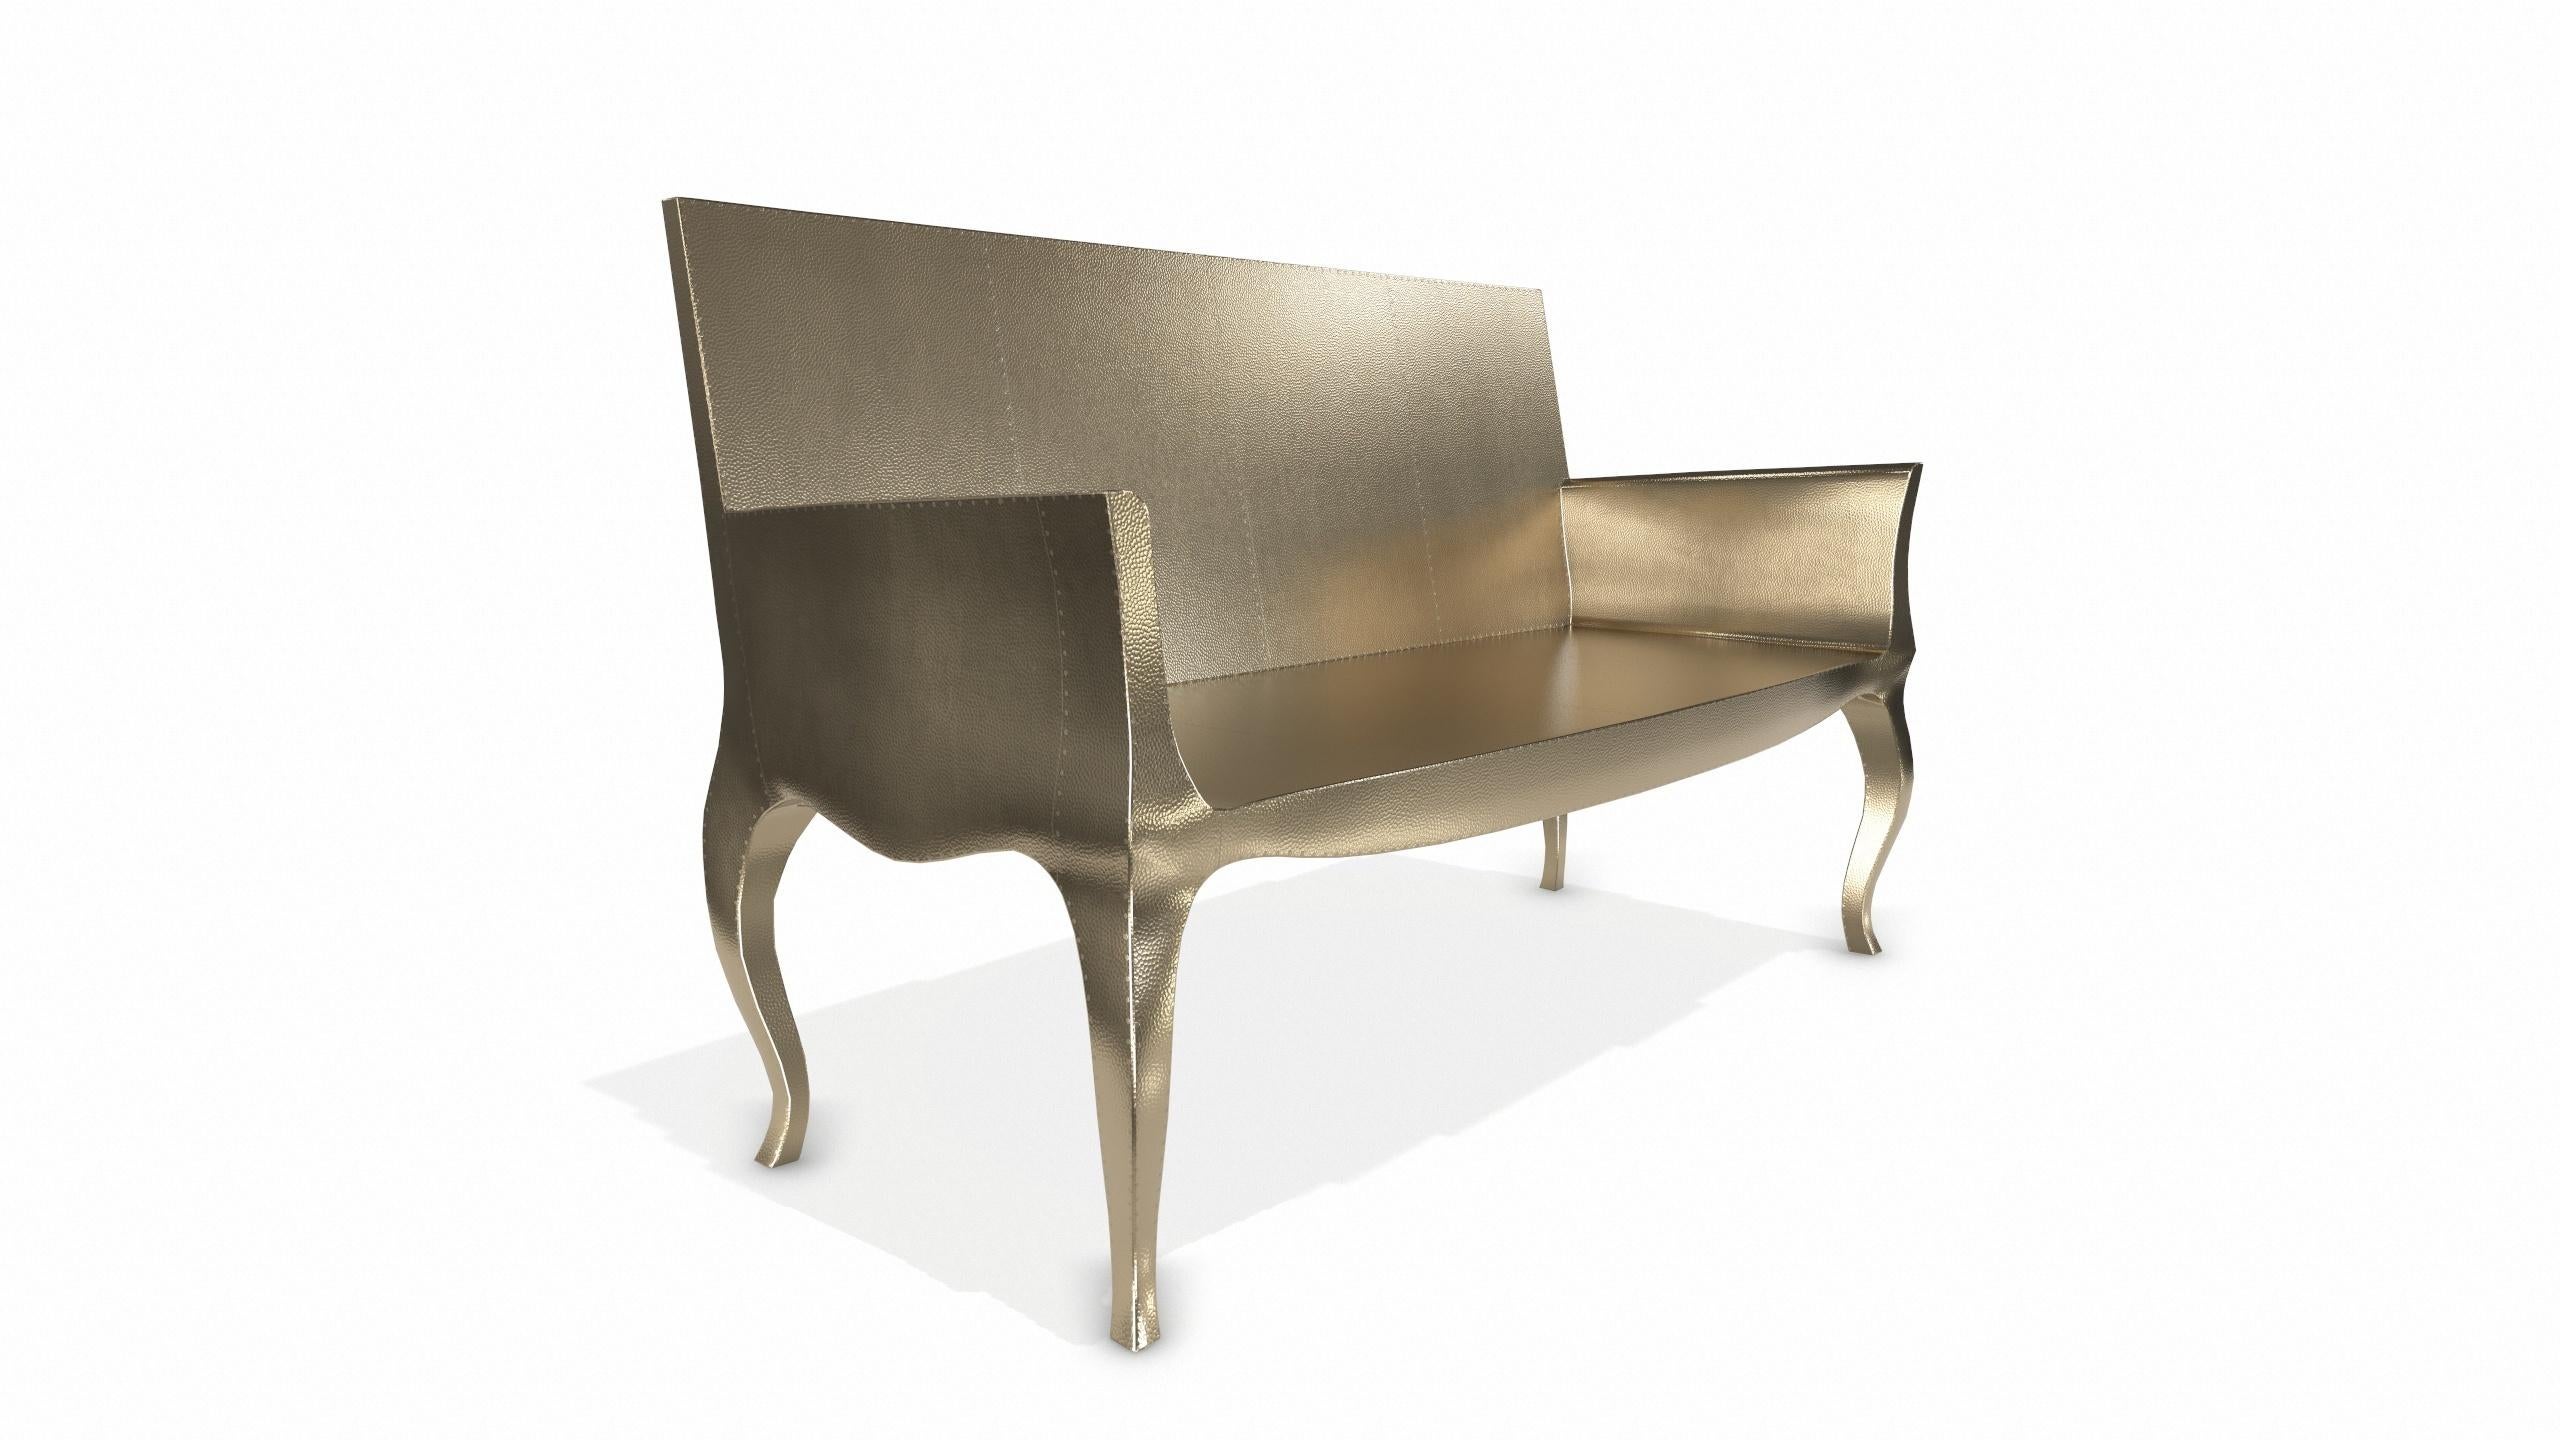 Louise Settee Art Deco Daybeds in Mid. Hammered Brass by Paul Mathieu In New Condition For Sale In New York, NY